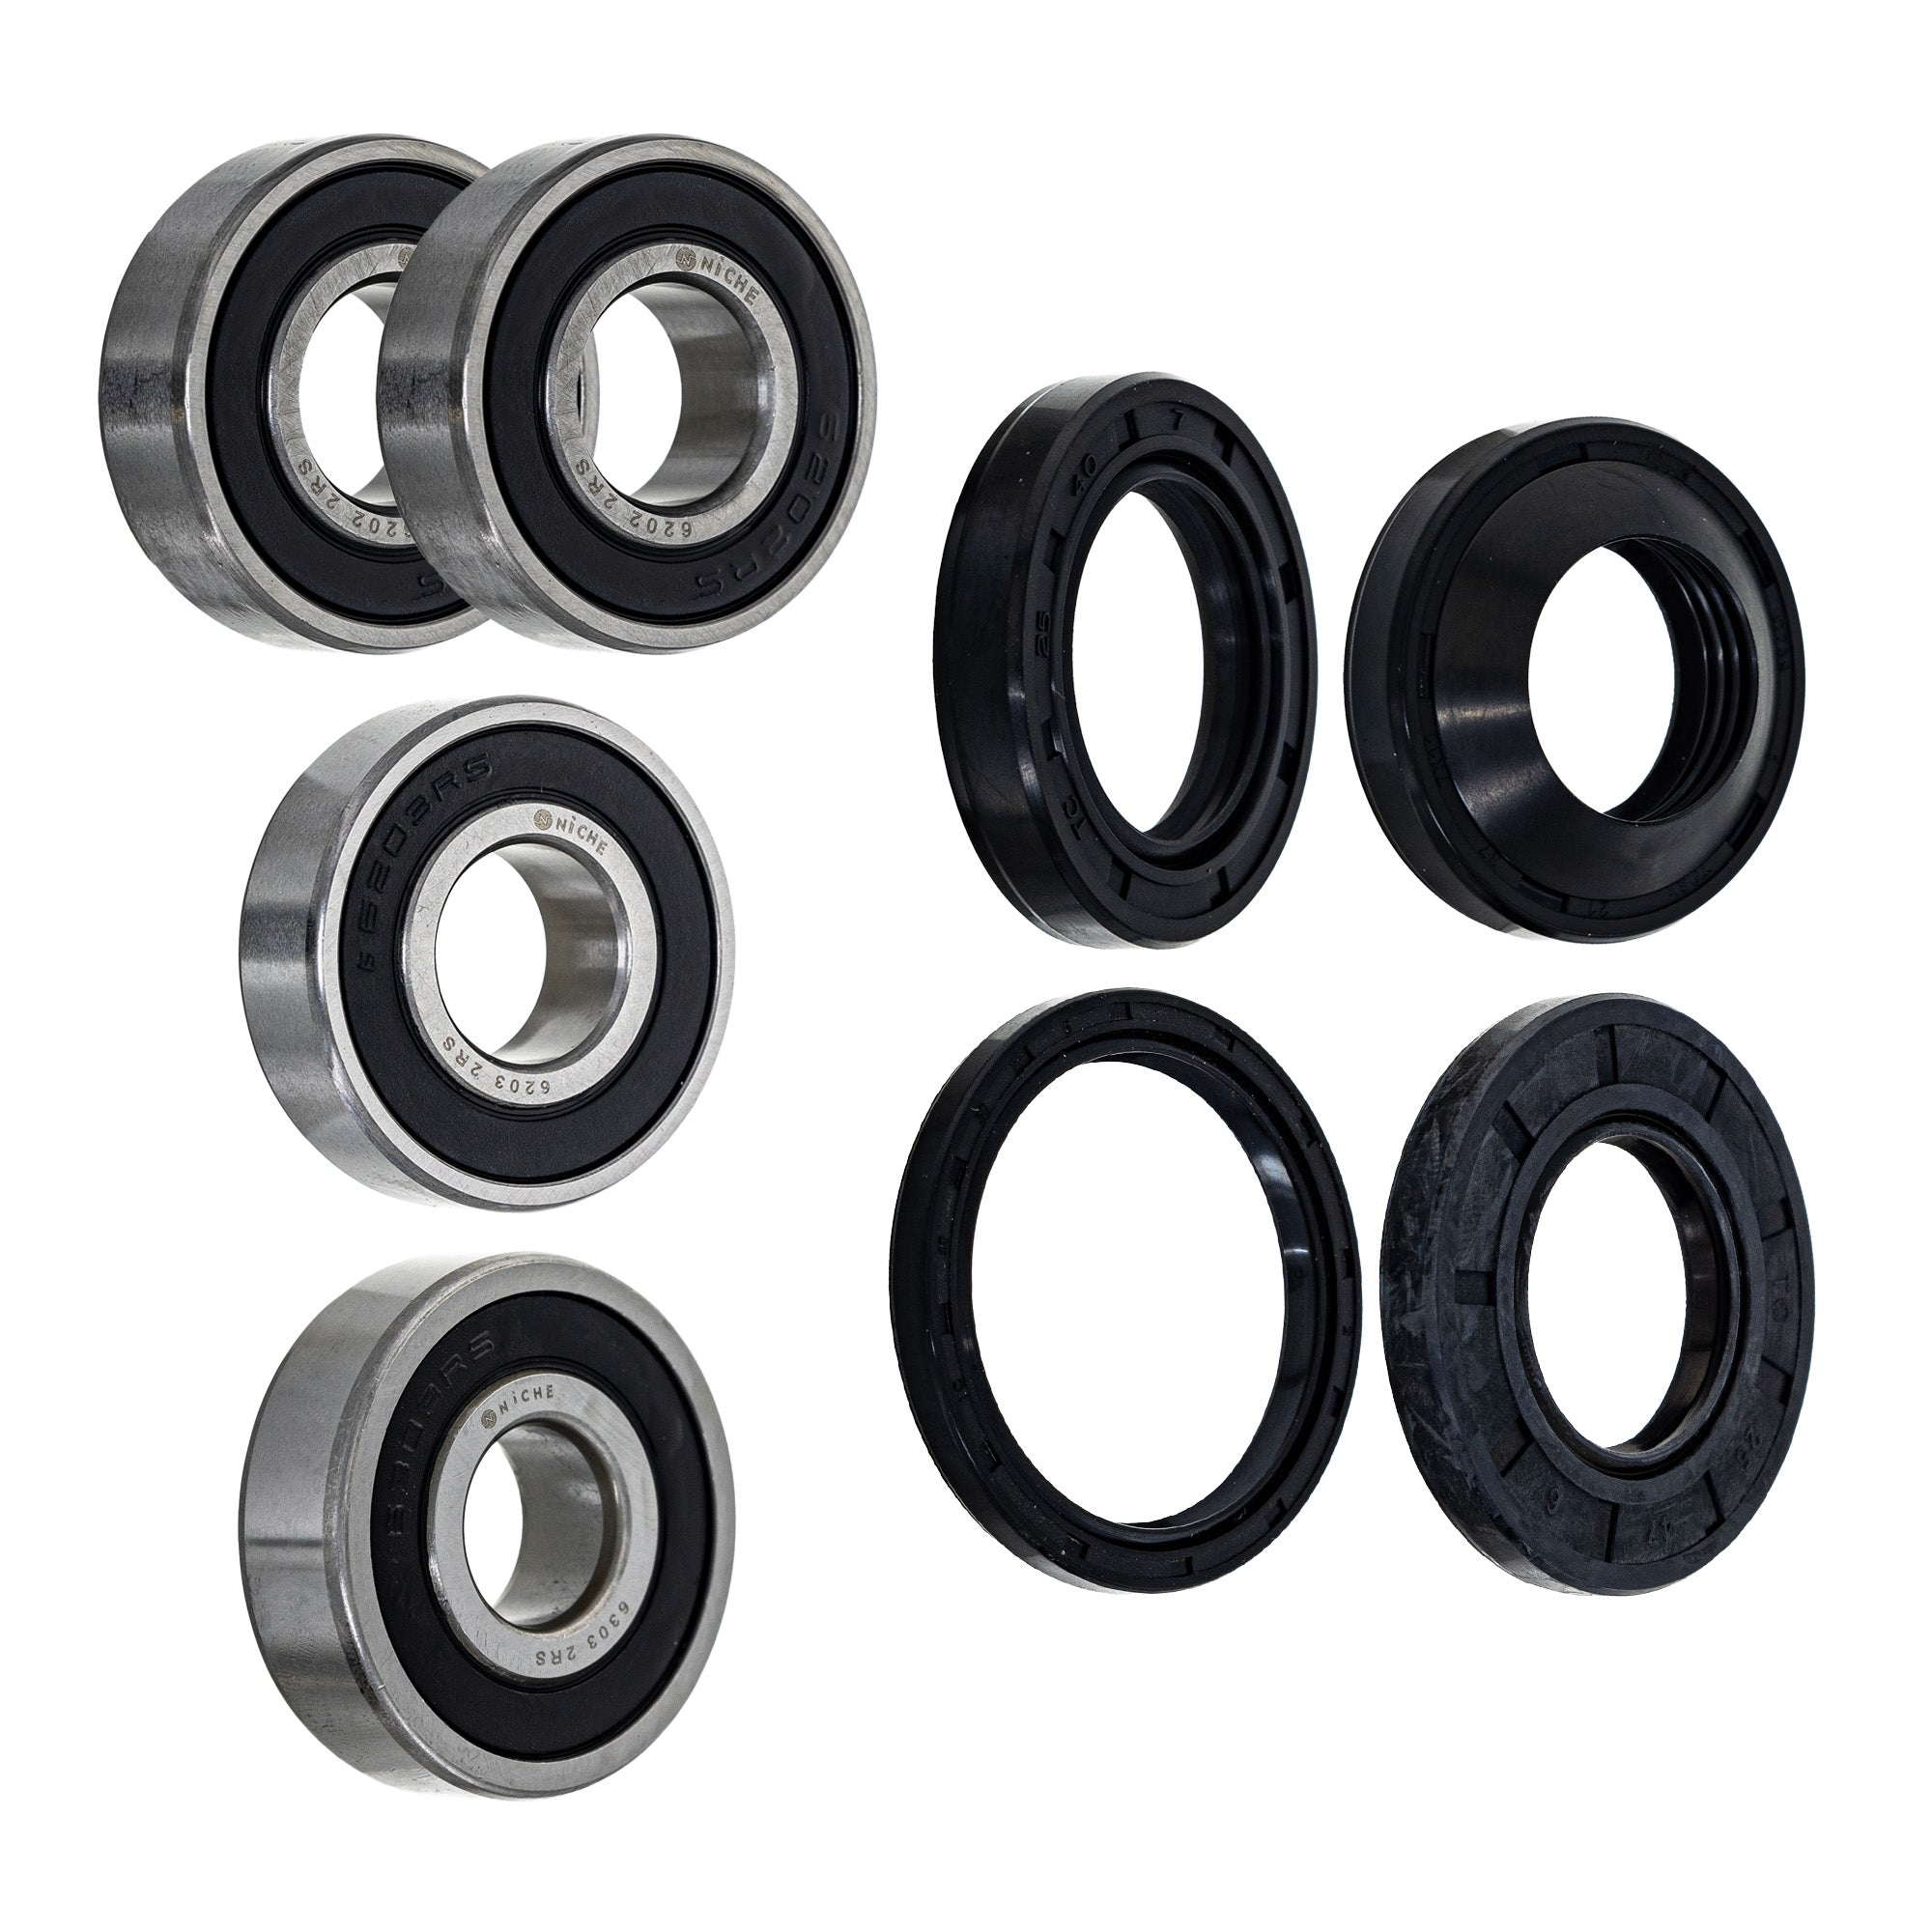 Wheel Bearing Seal Kit for zOTHER Ref No XR250R CRF230L NICHE MK1008807